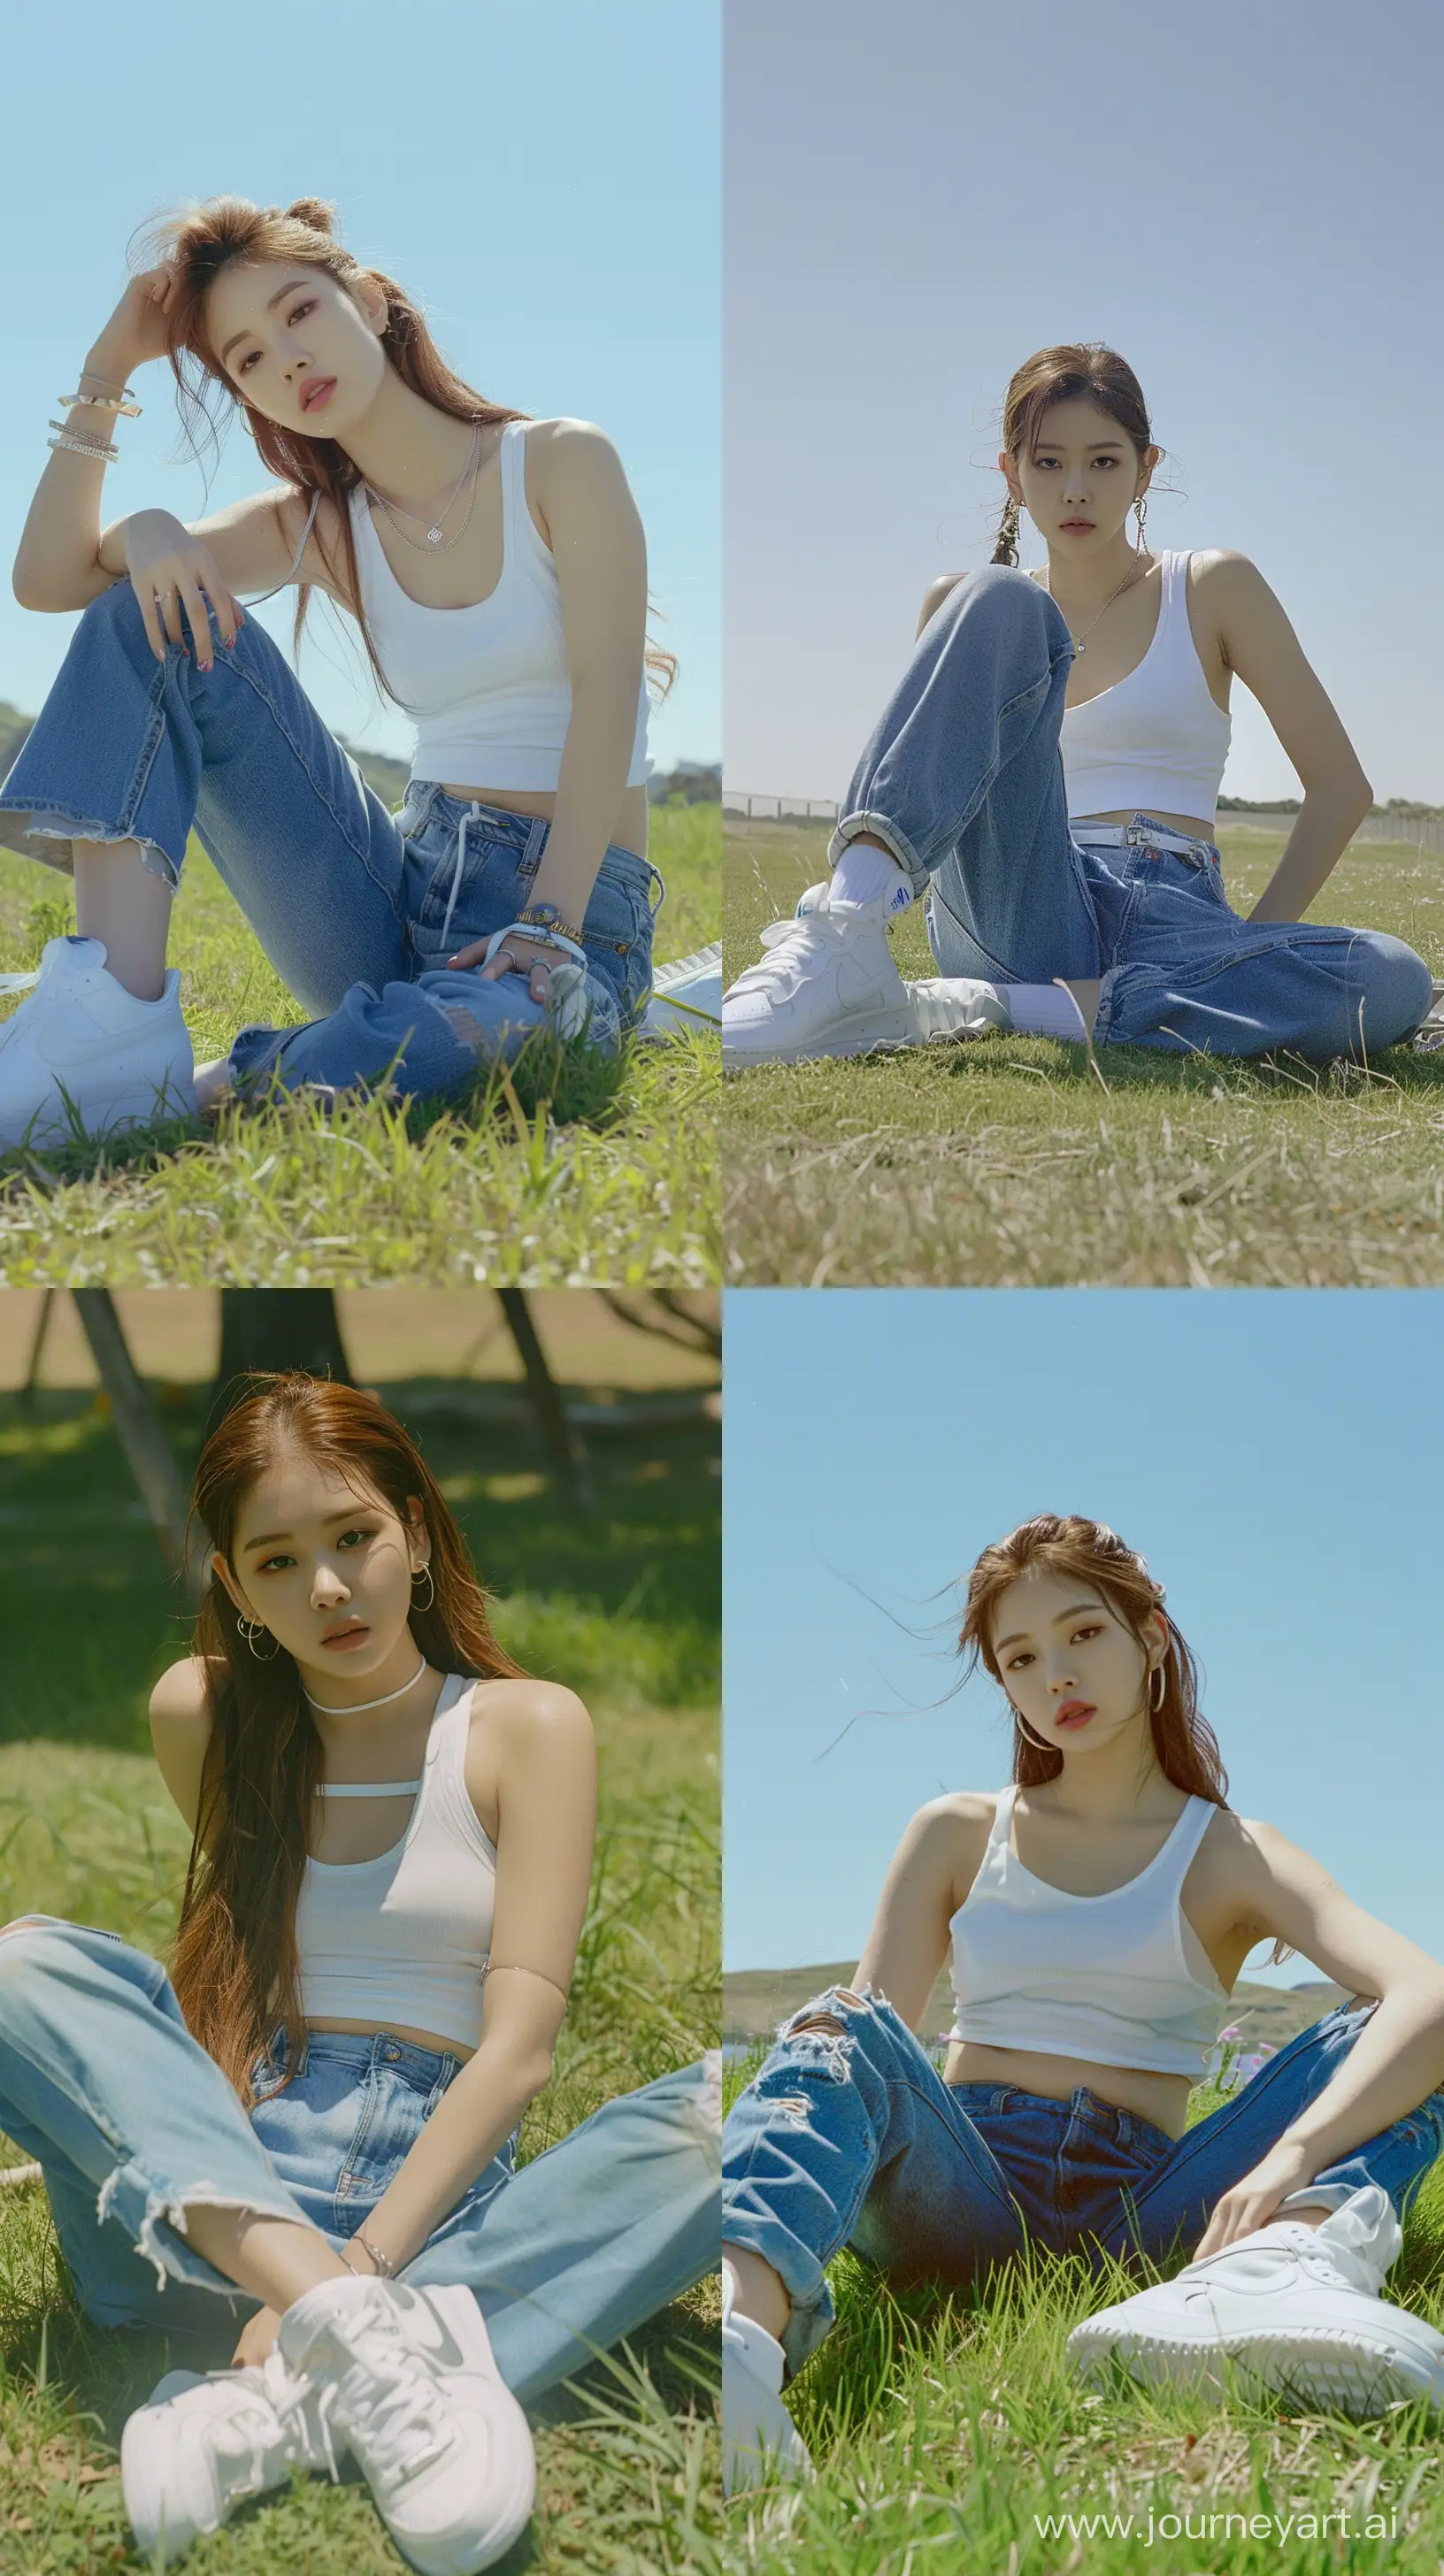 Blackpinks-Jennie-in-Casual-White-Tank-Top-and-Oversized-Blue-Jeans